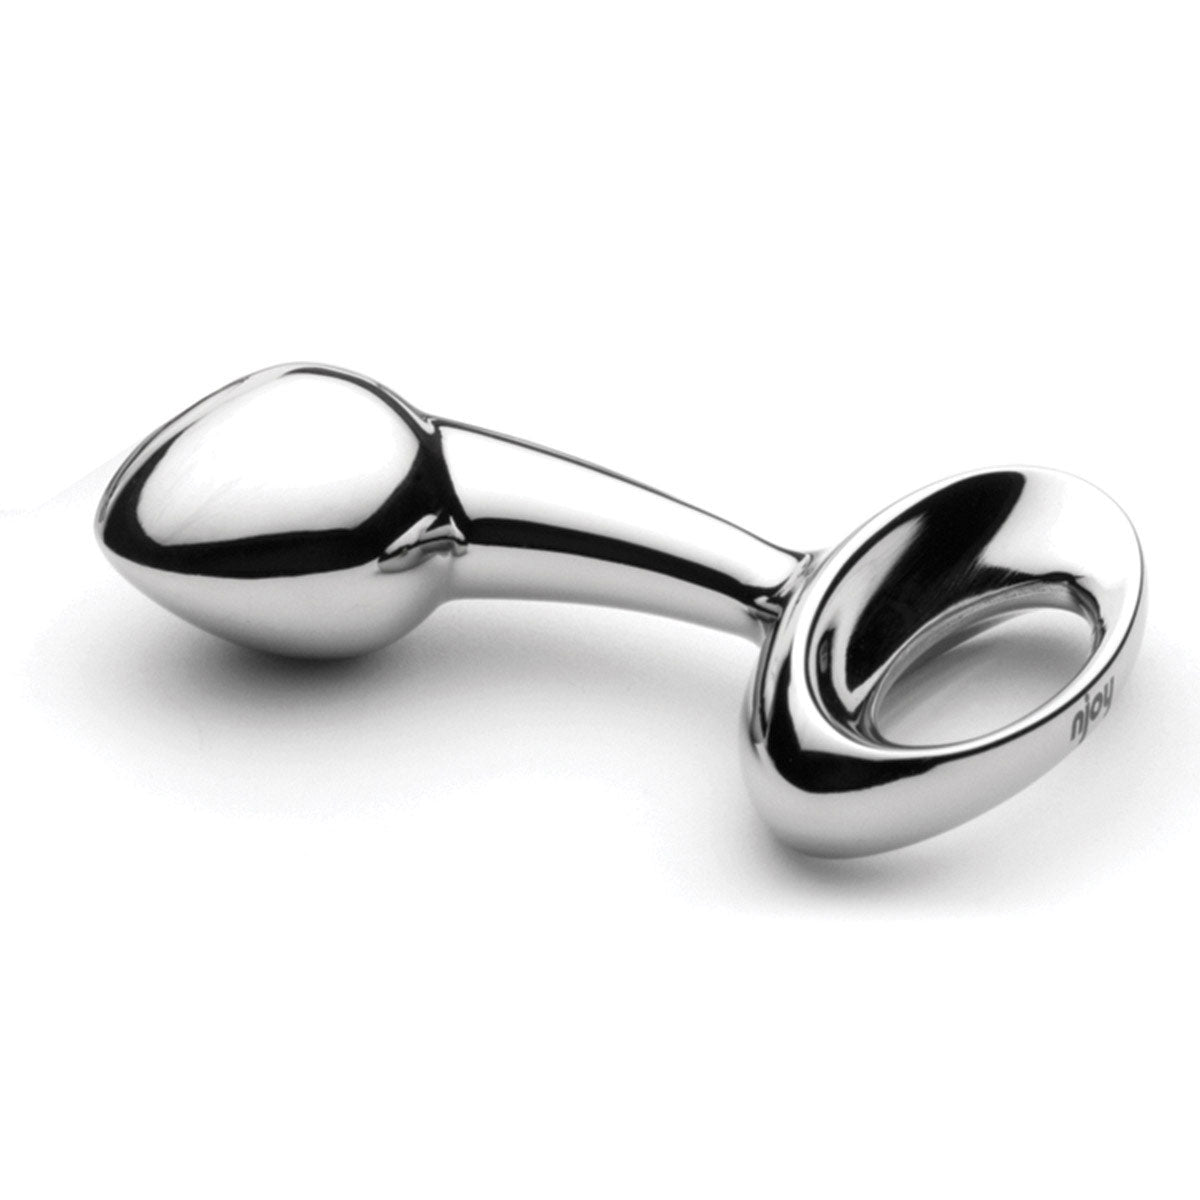 njoy Pure Stainless Steel Butt Plug - Large